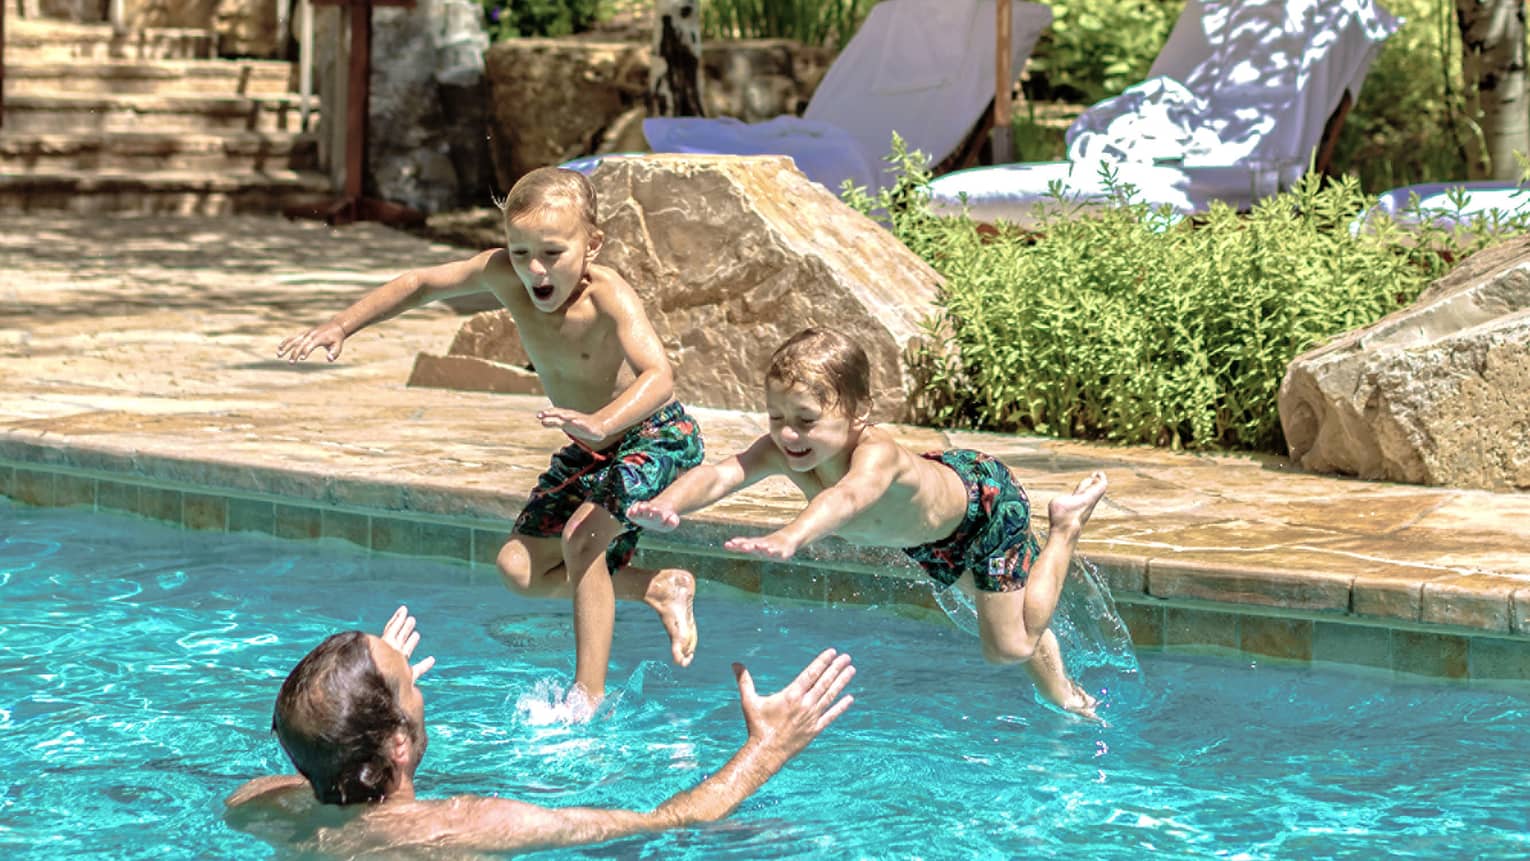 Two young boys jump into their father's outstretched arms in an outdoor pool 